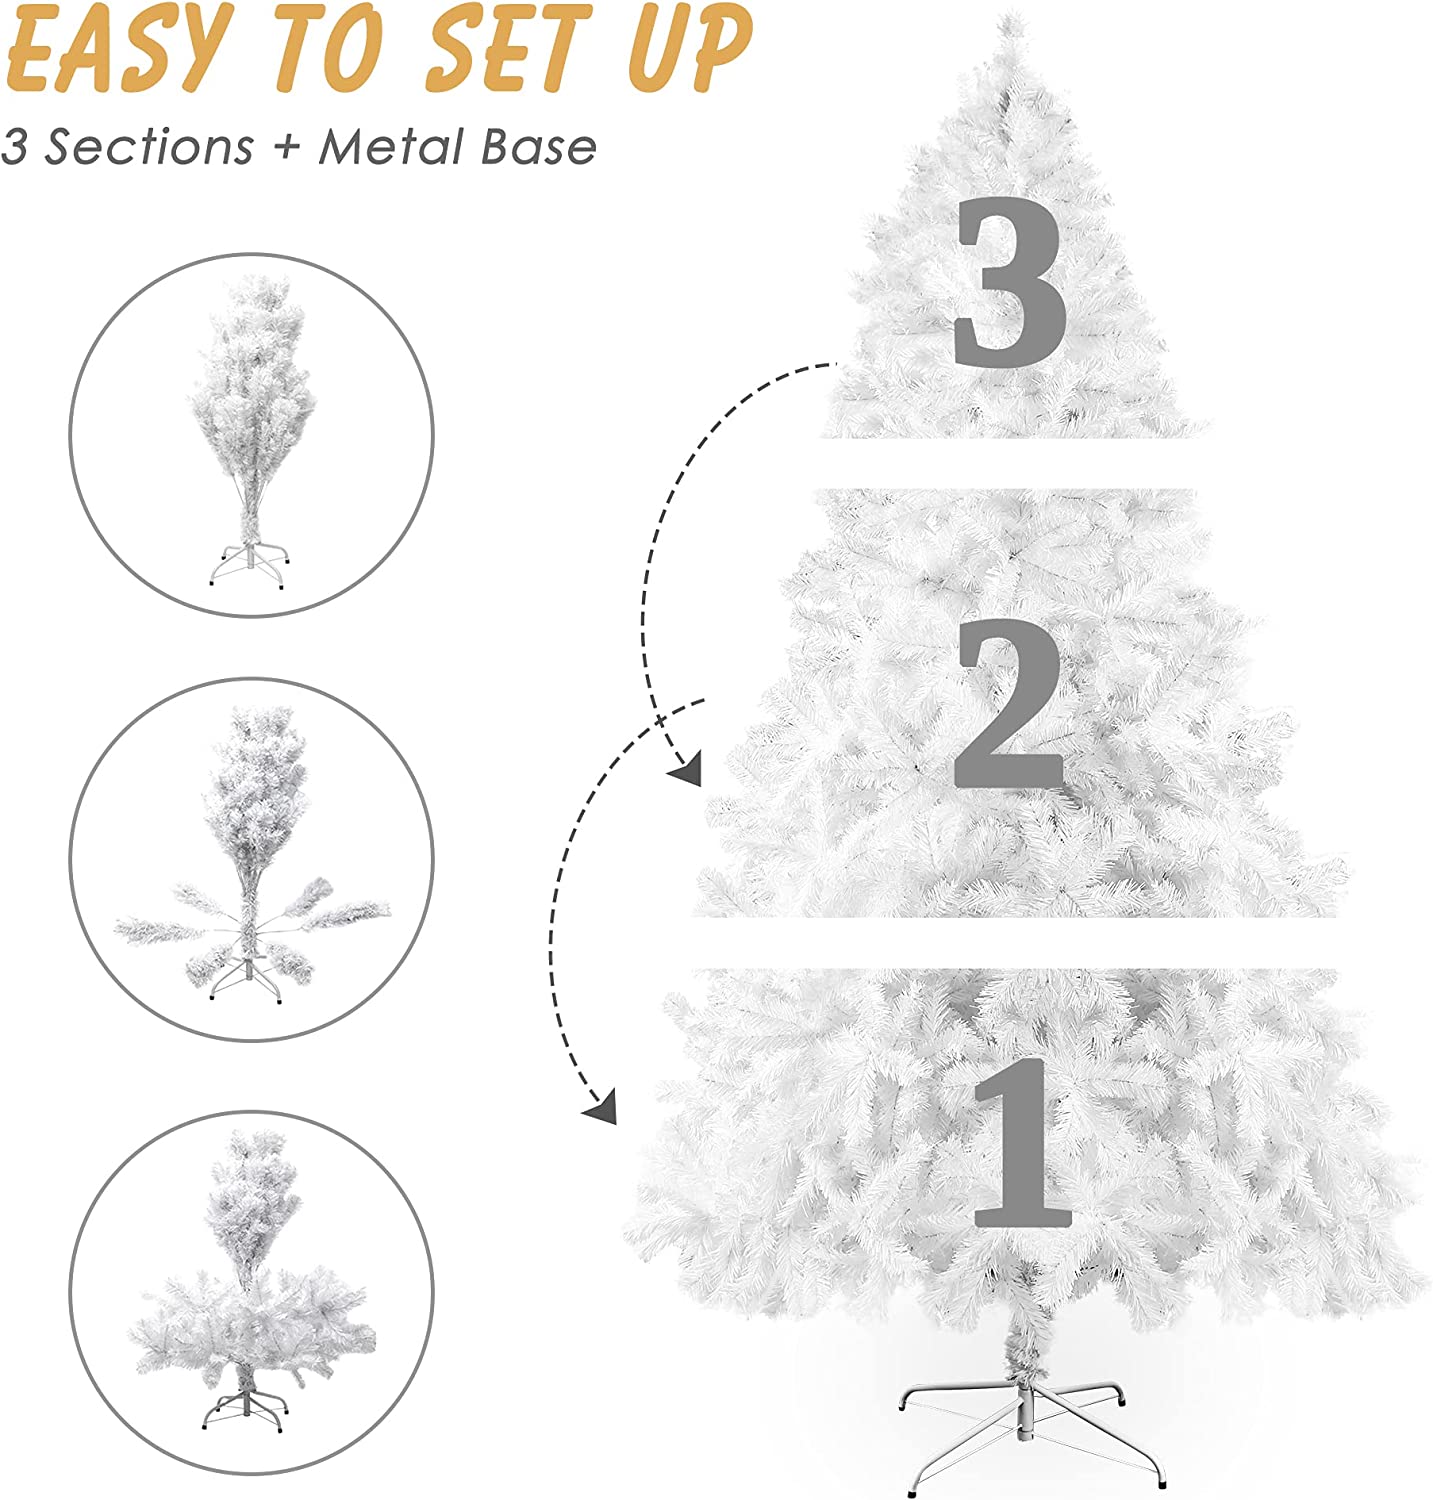 7' High Christmas Tree 1000 Tips Decorate Pine Tree with Metal Legs White & Decorations